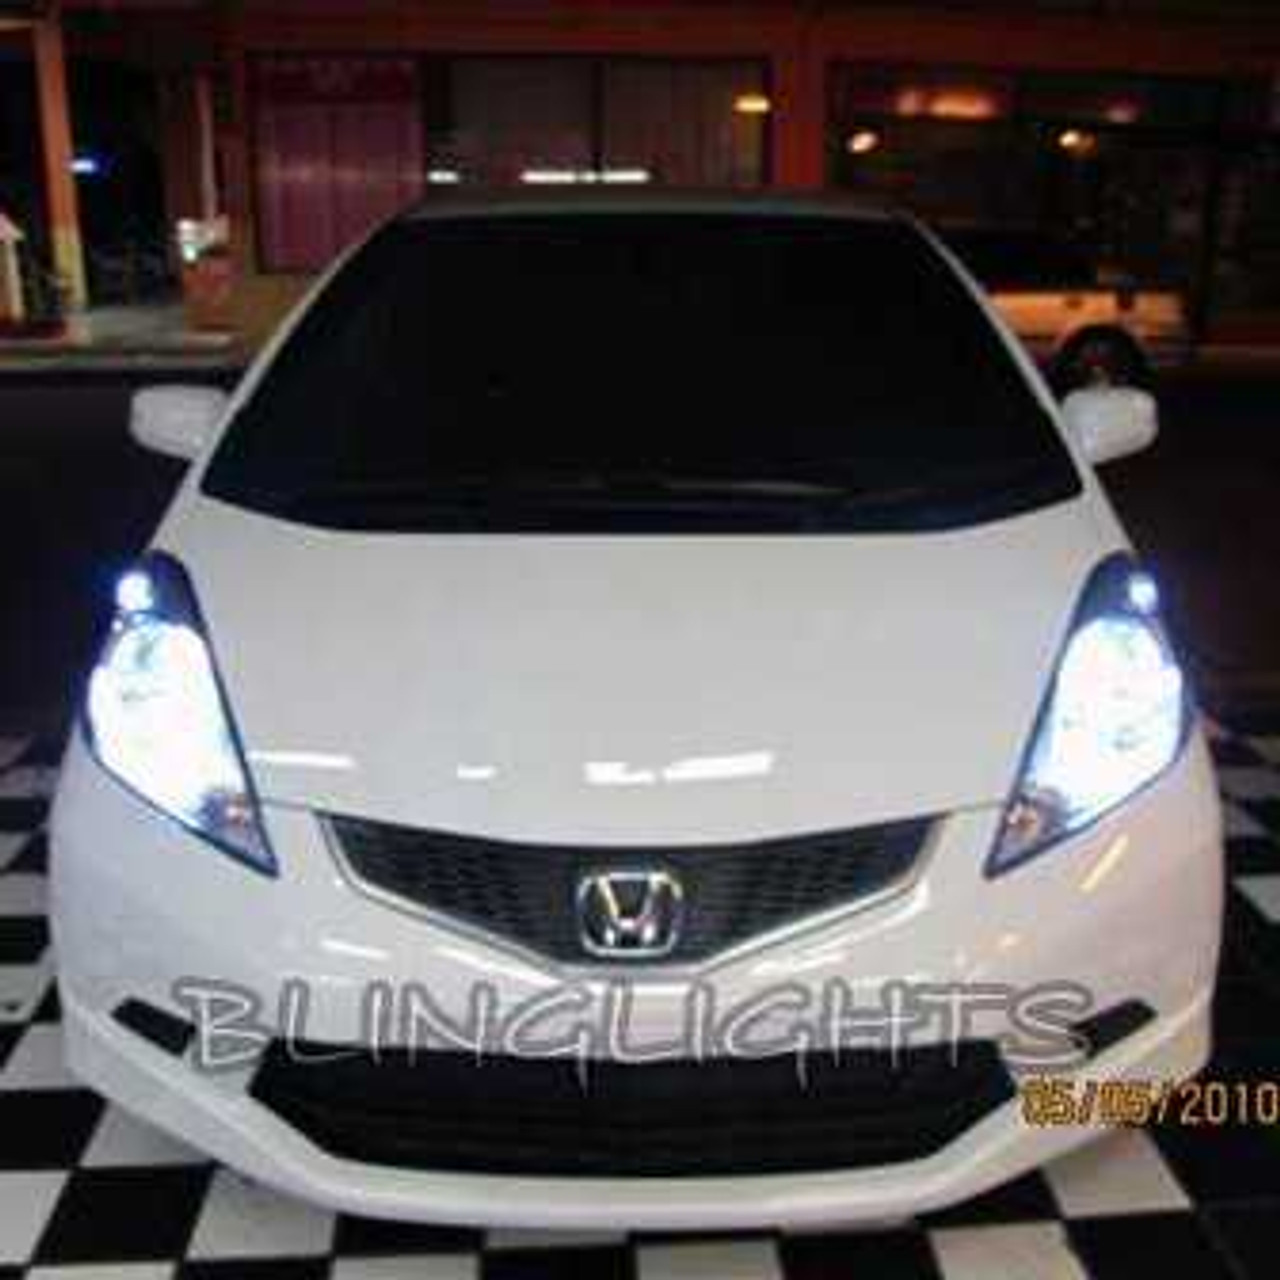 Honda Fit Bright White Replacement Light Bulbs for Headlamps Headlights Head Lamps Lights